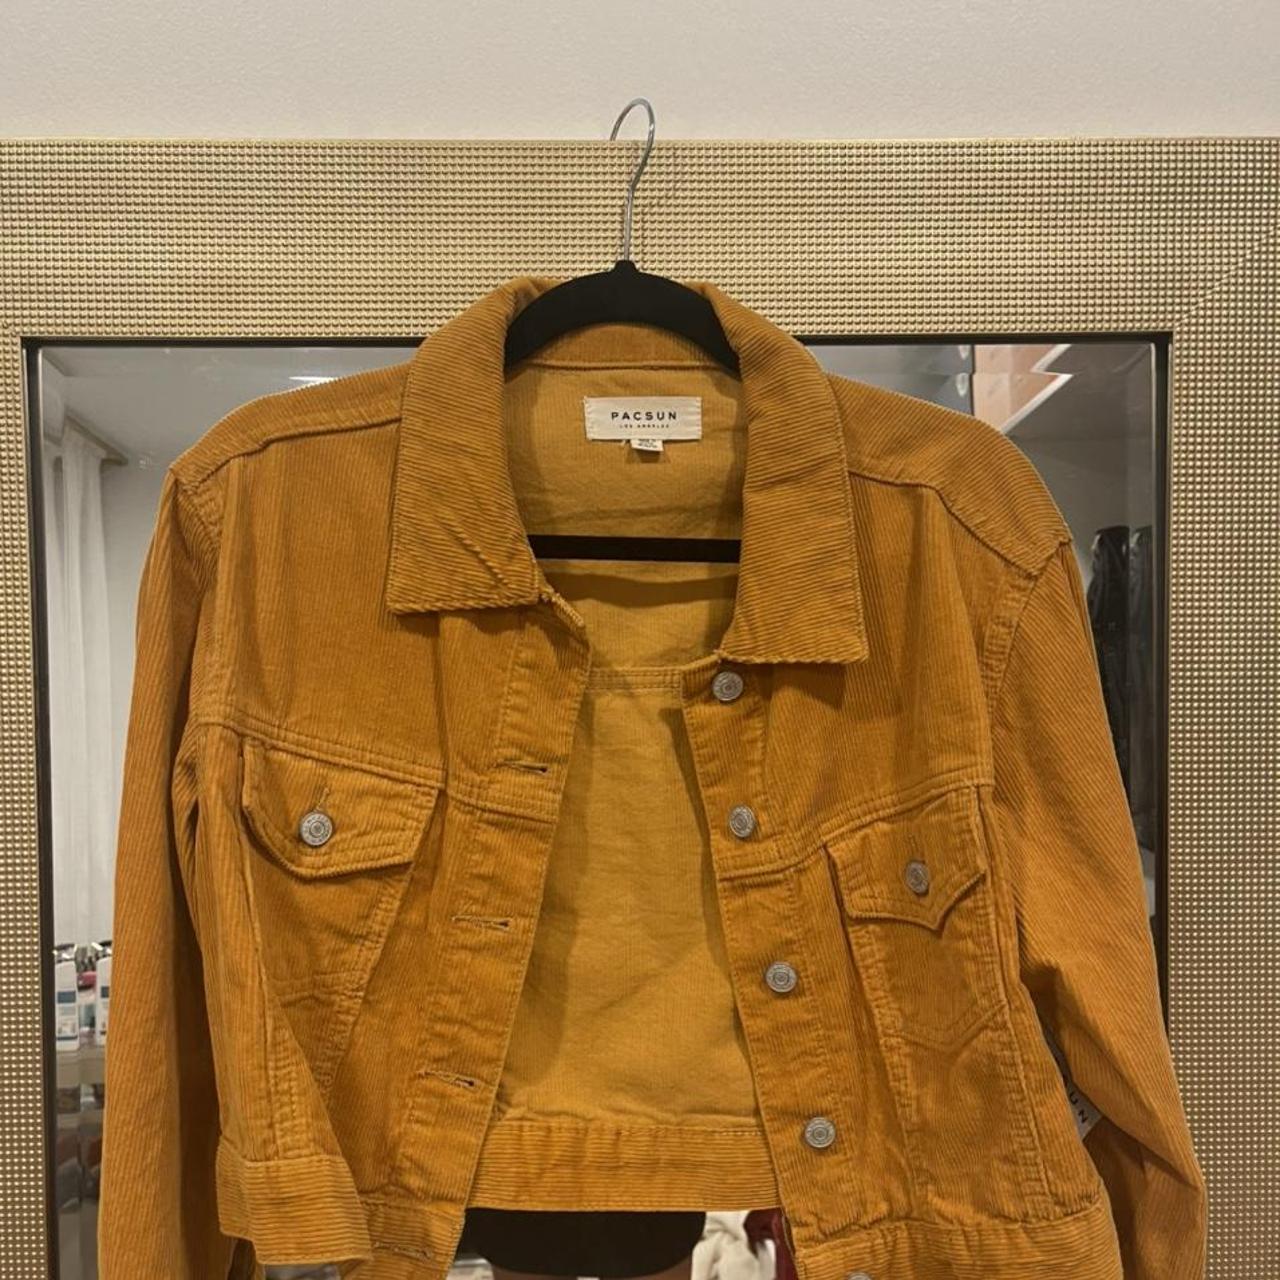 Product Image 2 - Pacsun mustard yellow cropped corduroy